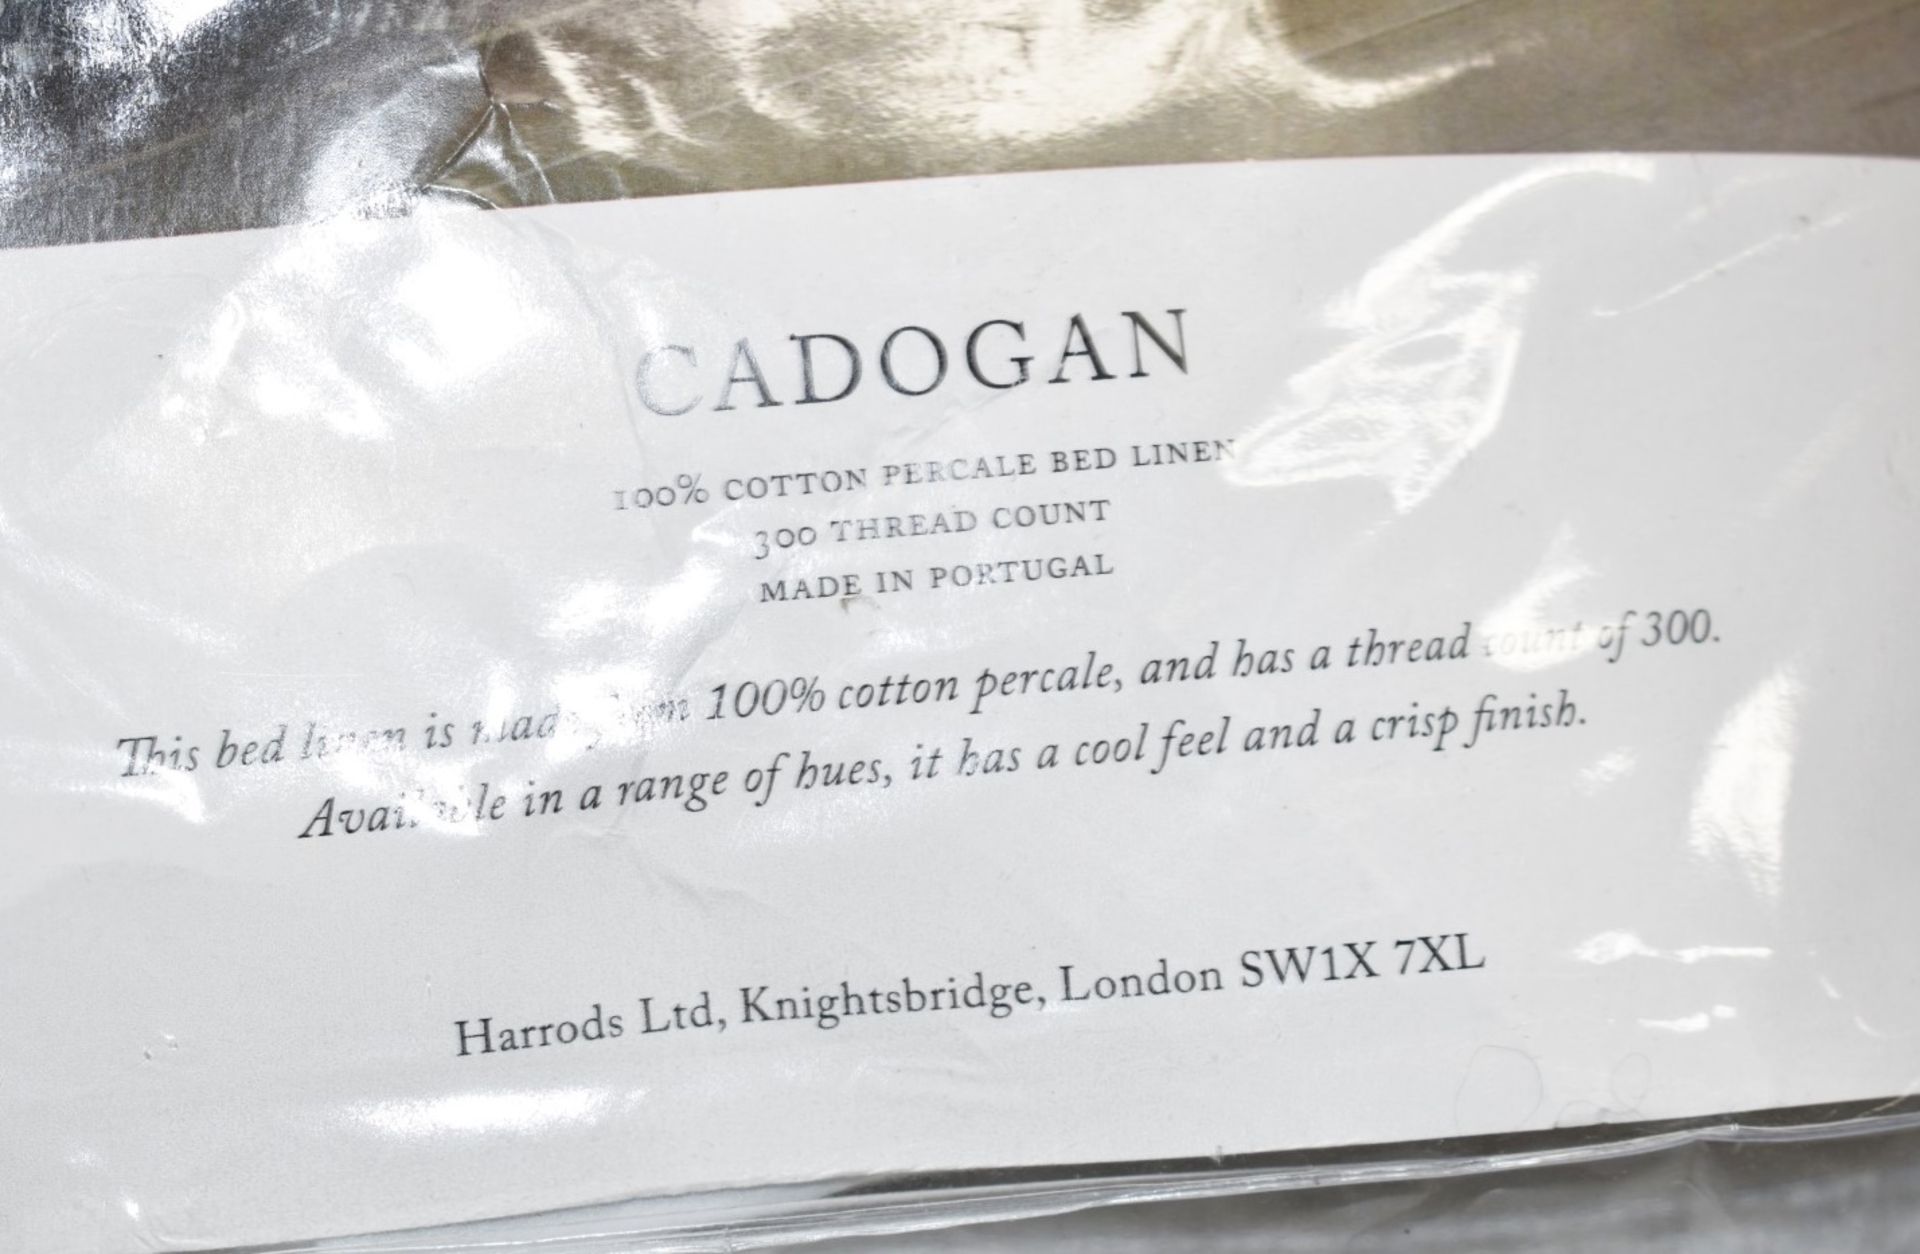 1 x HARRODS OF LONDON 'Cadogan' King Duvet Cover Set, With Pillow Cases - Original Price £239.00 - Image 6 of 9